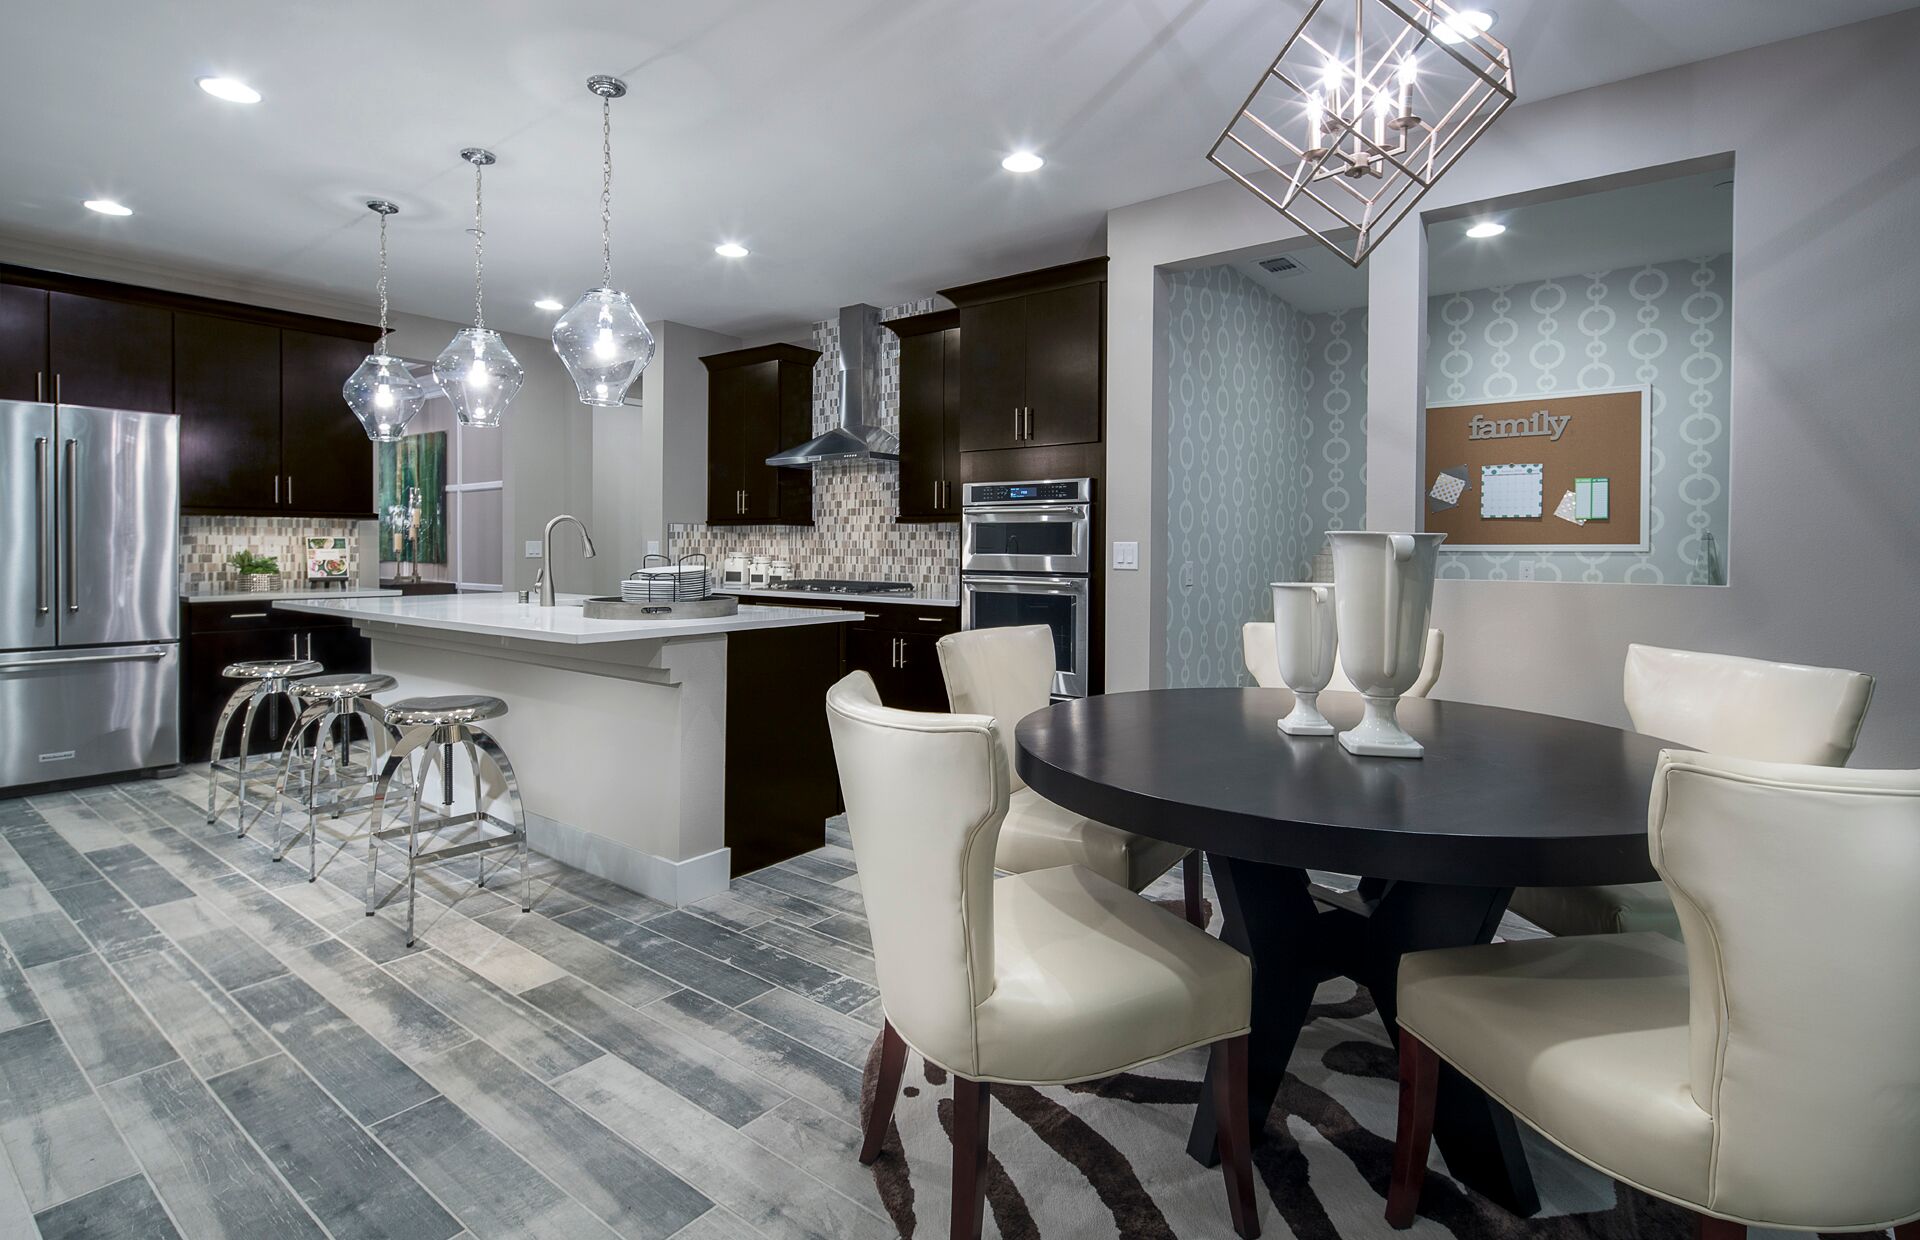 5 Kitchen Design Trends to Take From Model Homes - Lawson Realty Group